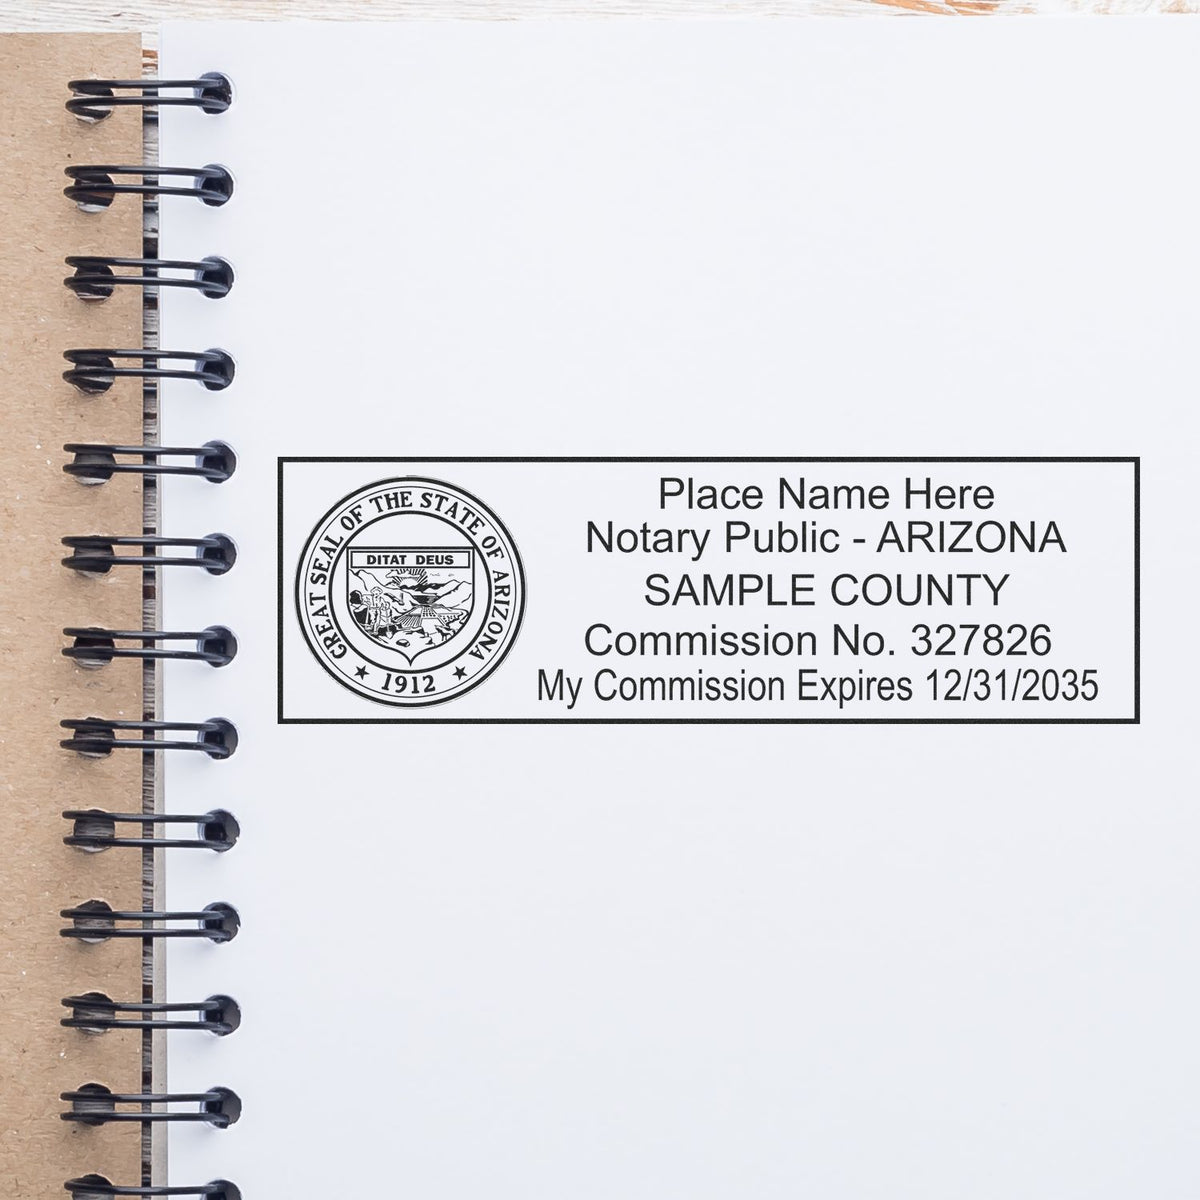 This paper is stamped with a sample imprint of the Super Slim Arizona Notary Public Stamp, signifying its quality and reliability.